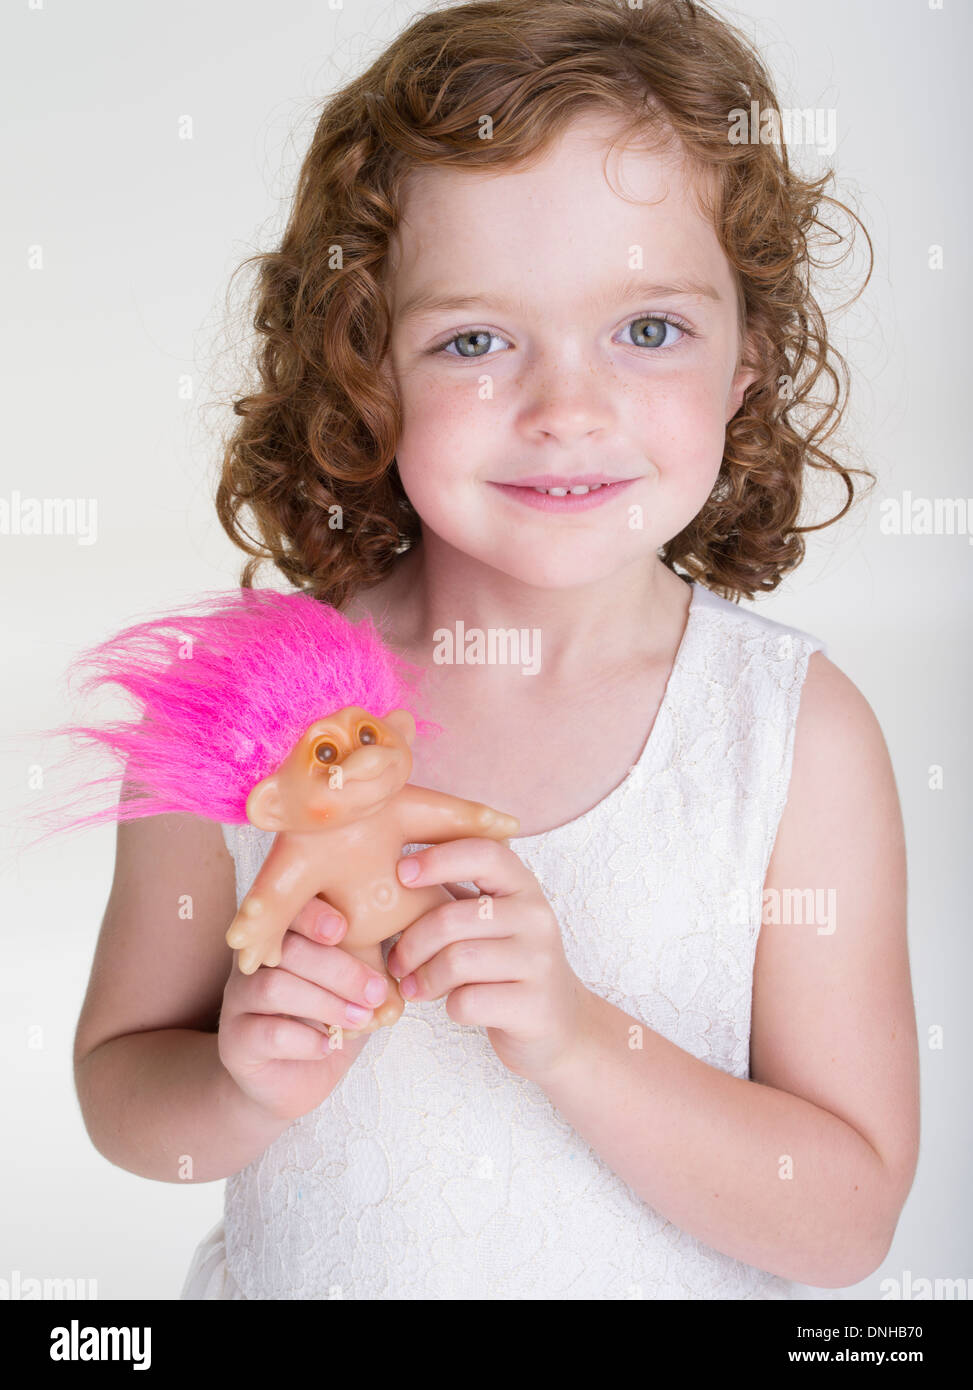 Young girl with Troll doll toy Stock Photo